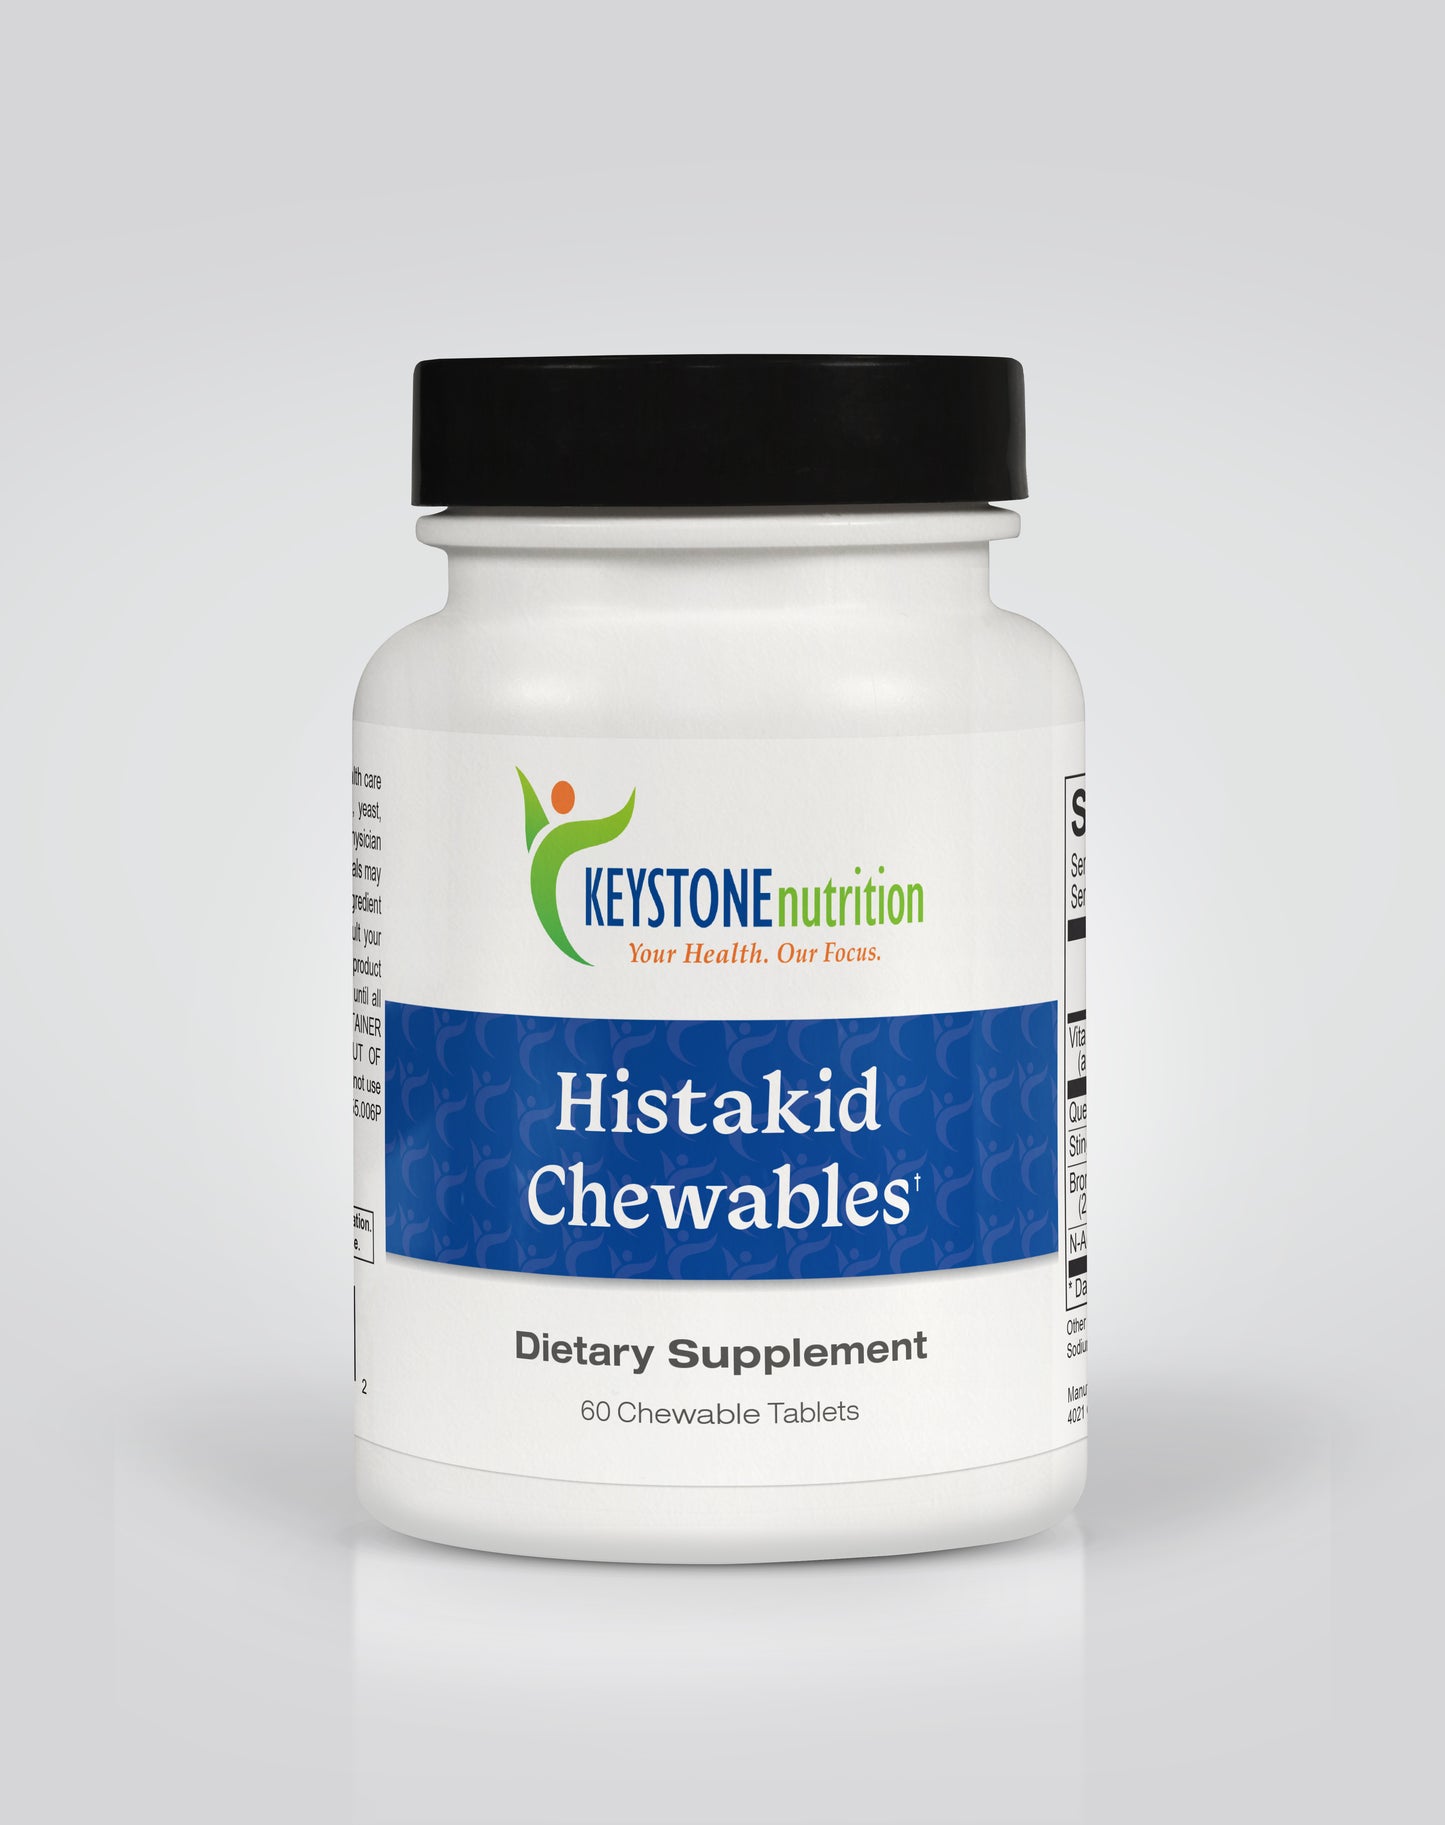 HistaKid Chewables